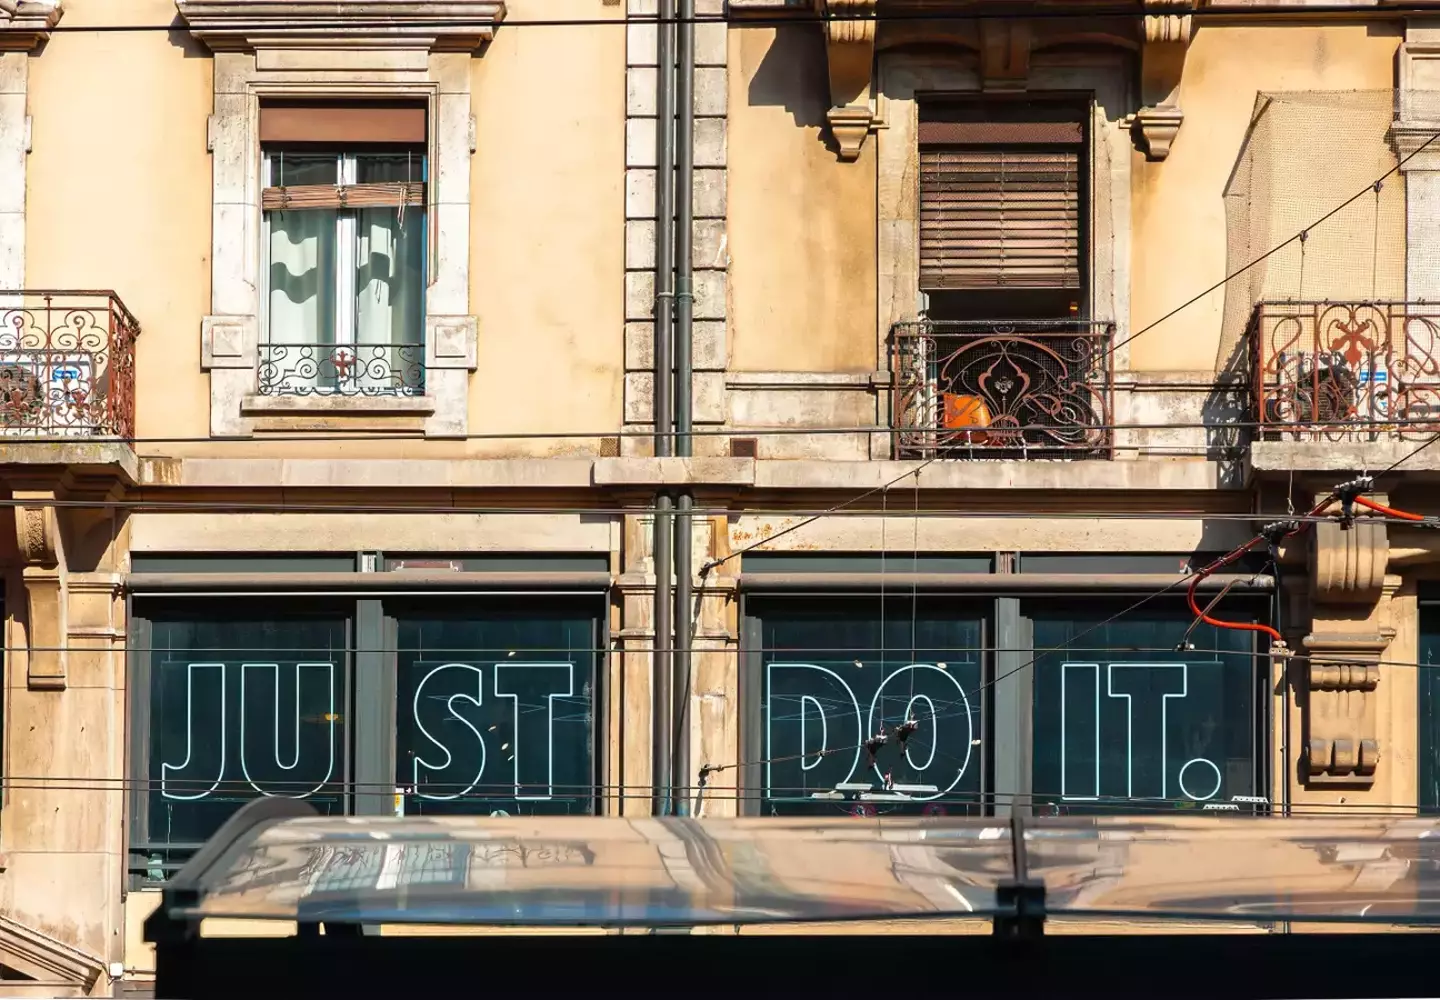 The famed 'Just Do It' slogan has some pretty macabre roots.